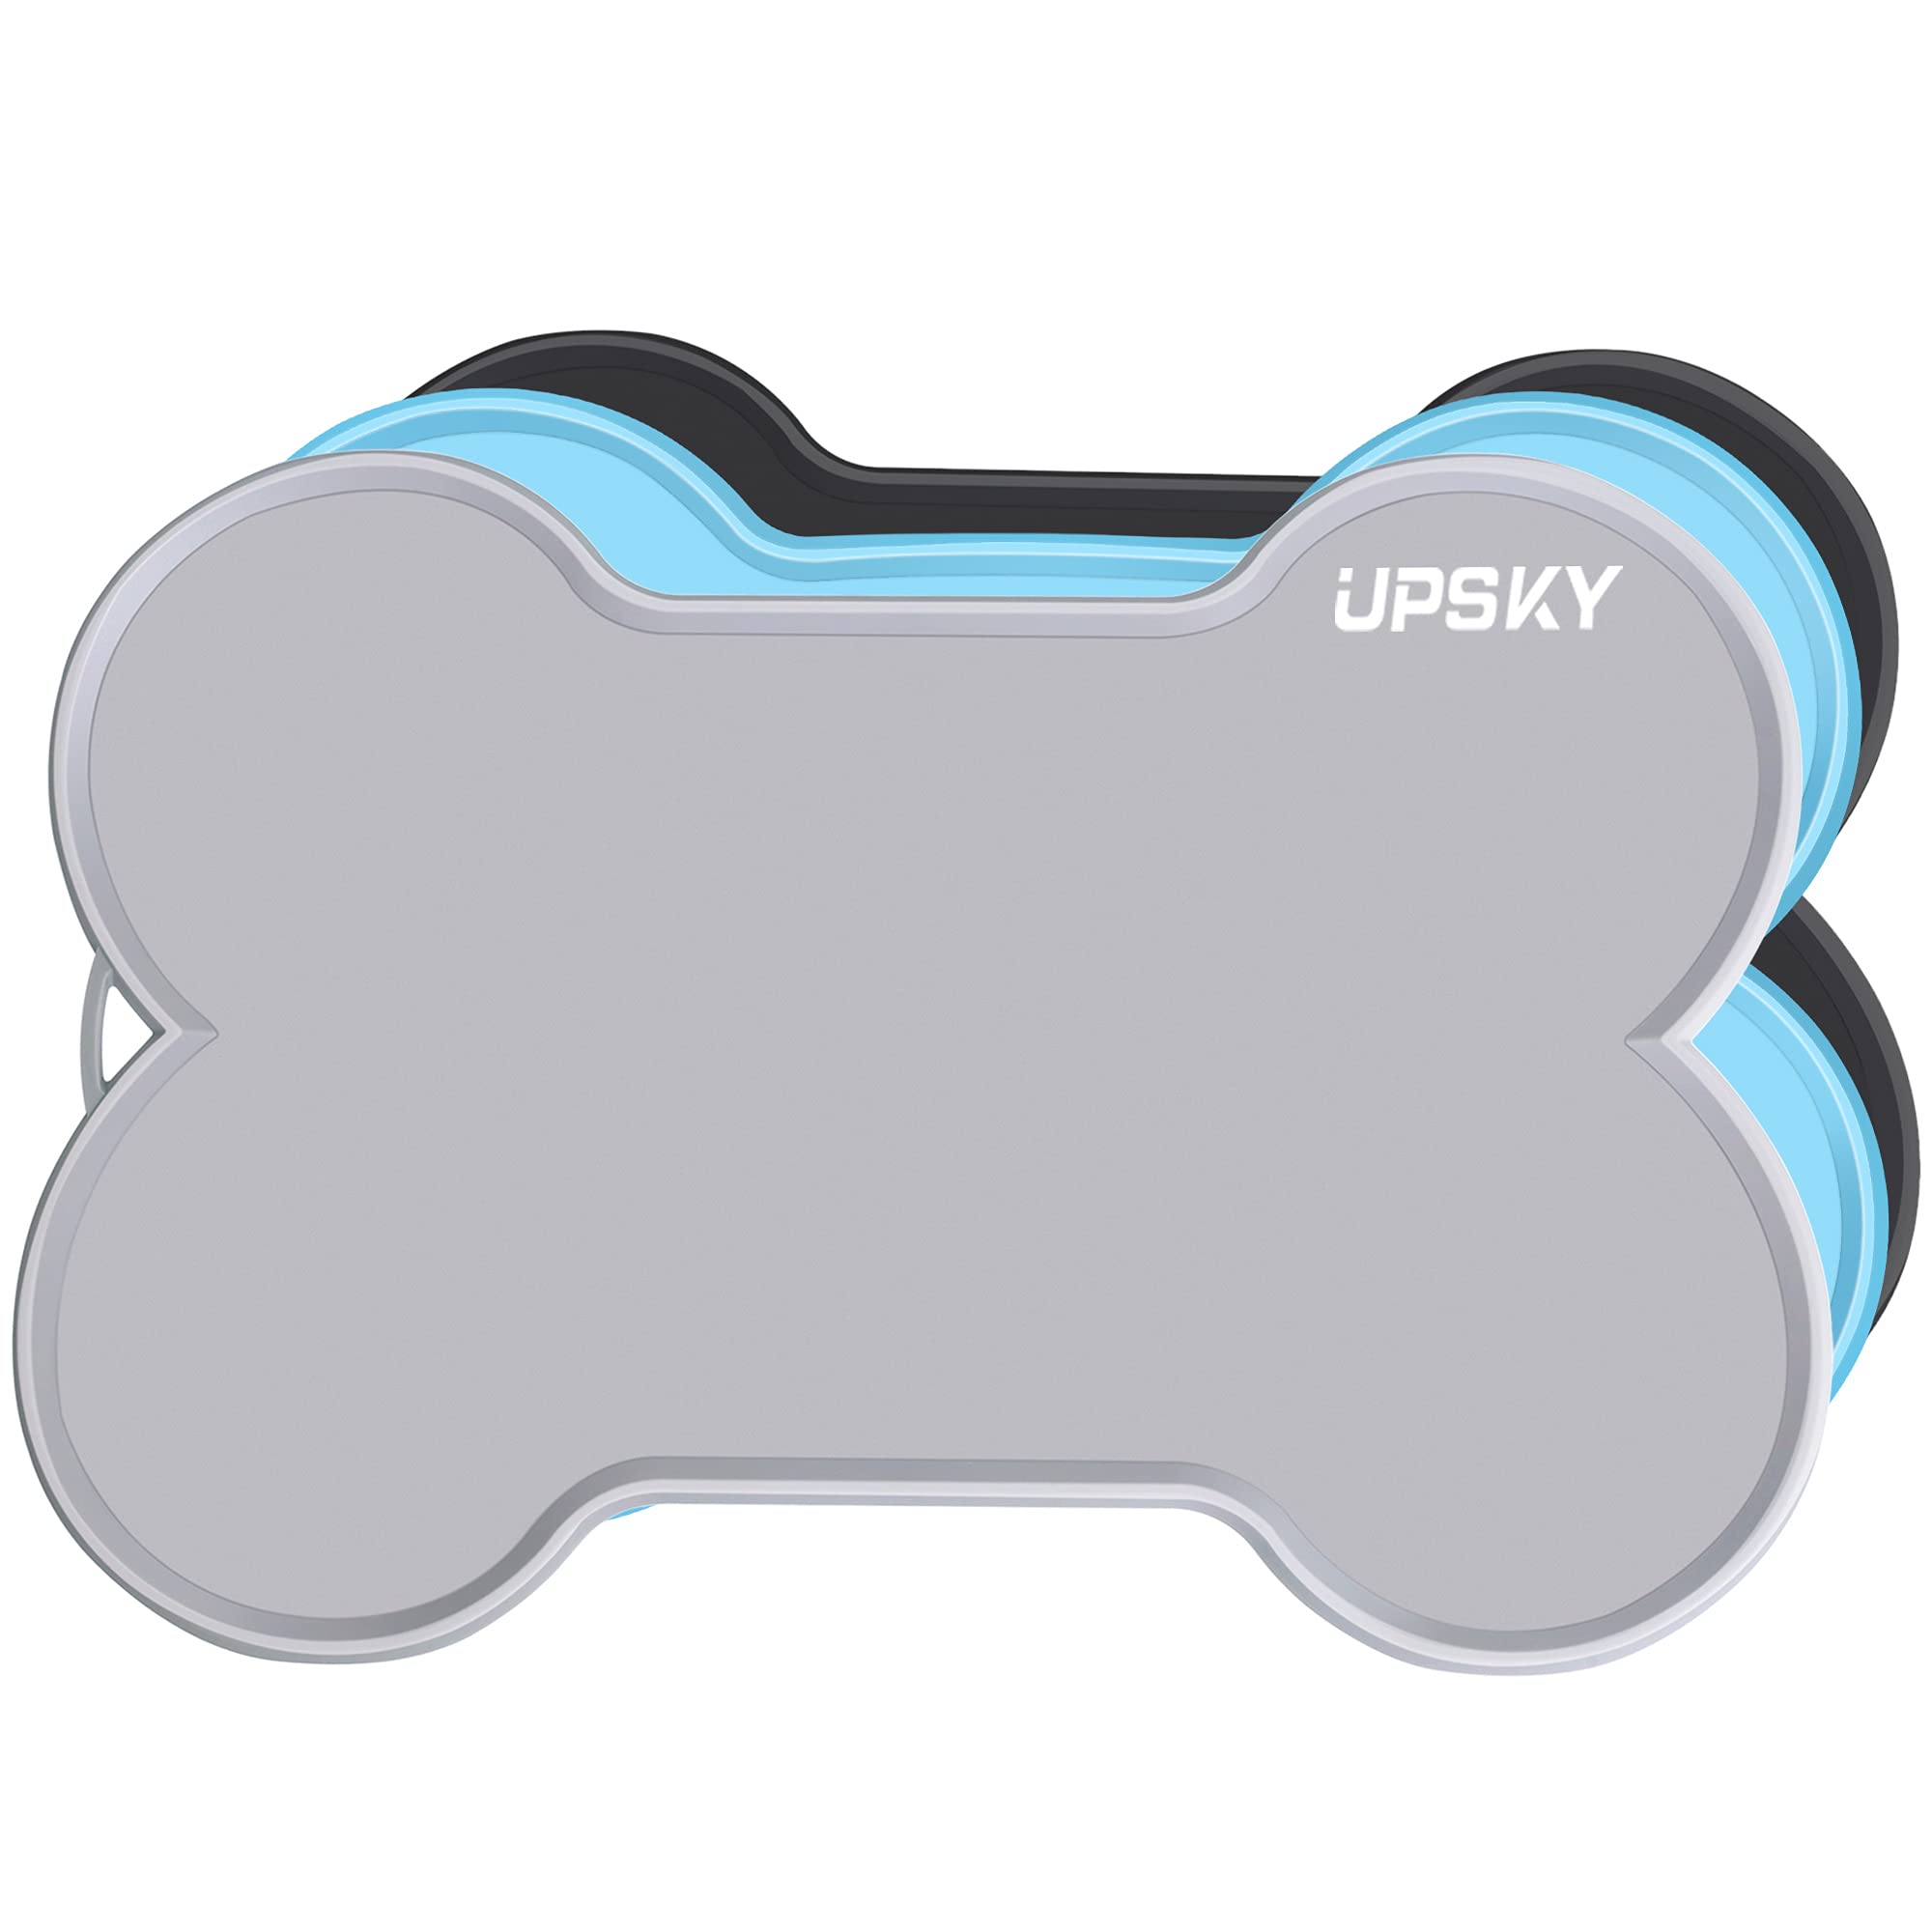 UPSKY Dog Food Mat Dog Cat Bowl Mat for Food and Water, Large 22 x 16 Dog  Feeding Mat for Floors, Waterproof Silicone Pet Placemat Tray Bone Shaped  with Raised Edge B-grey